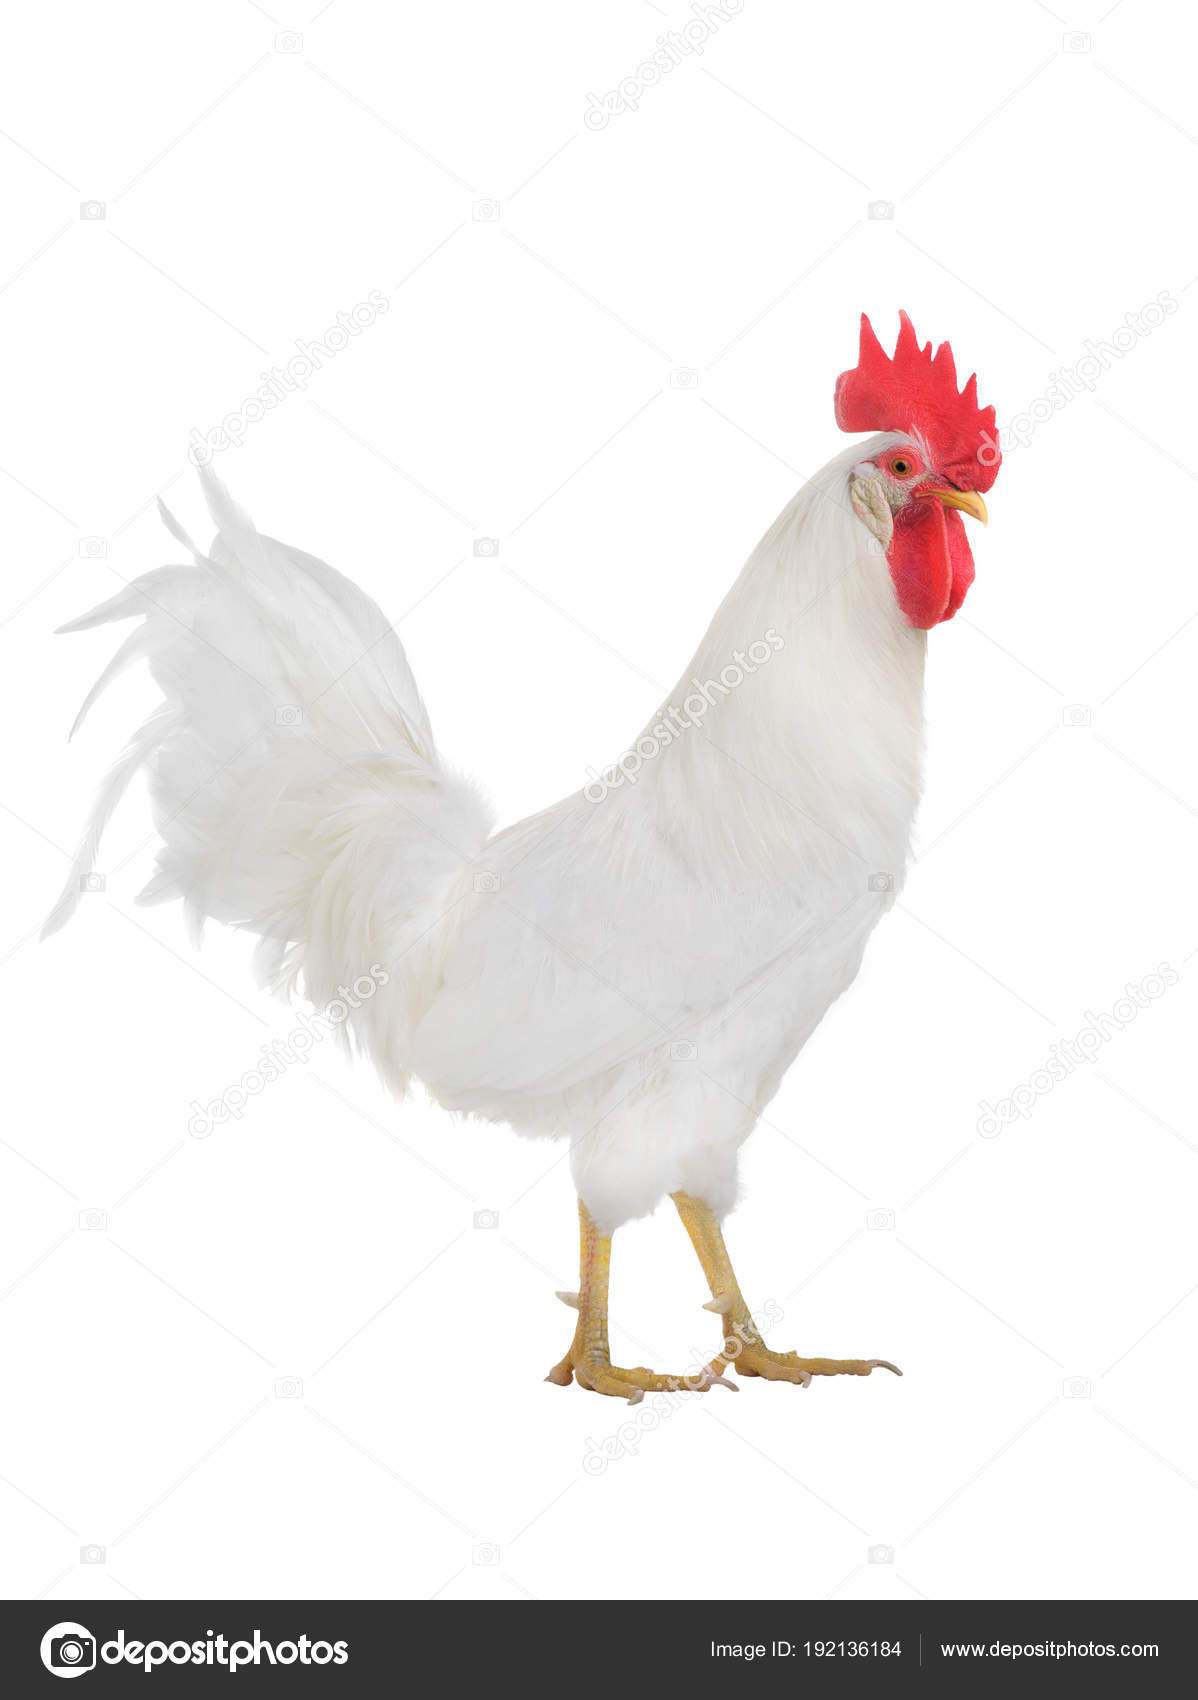 White rooster isolated — Stock Photo © bazil #192136184